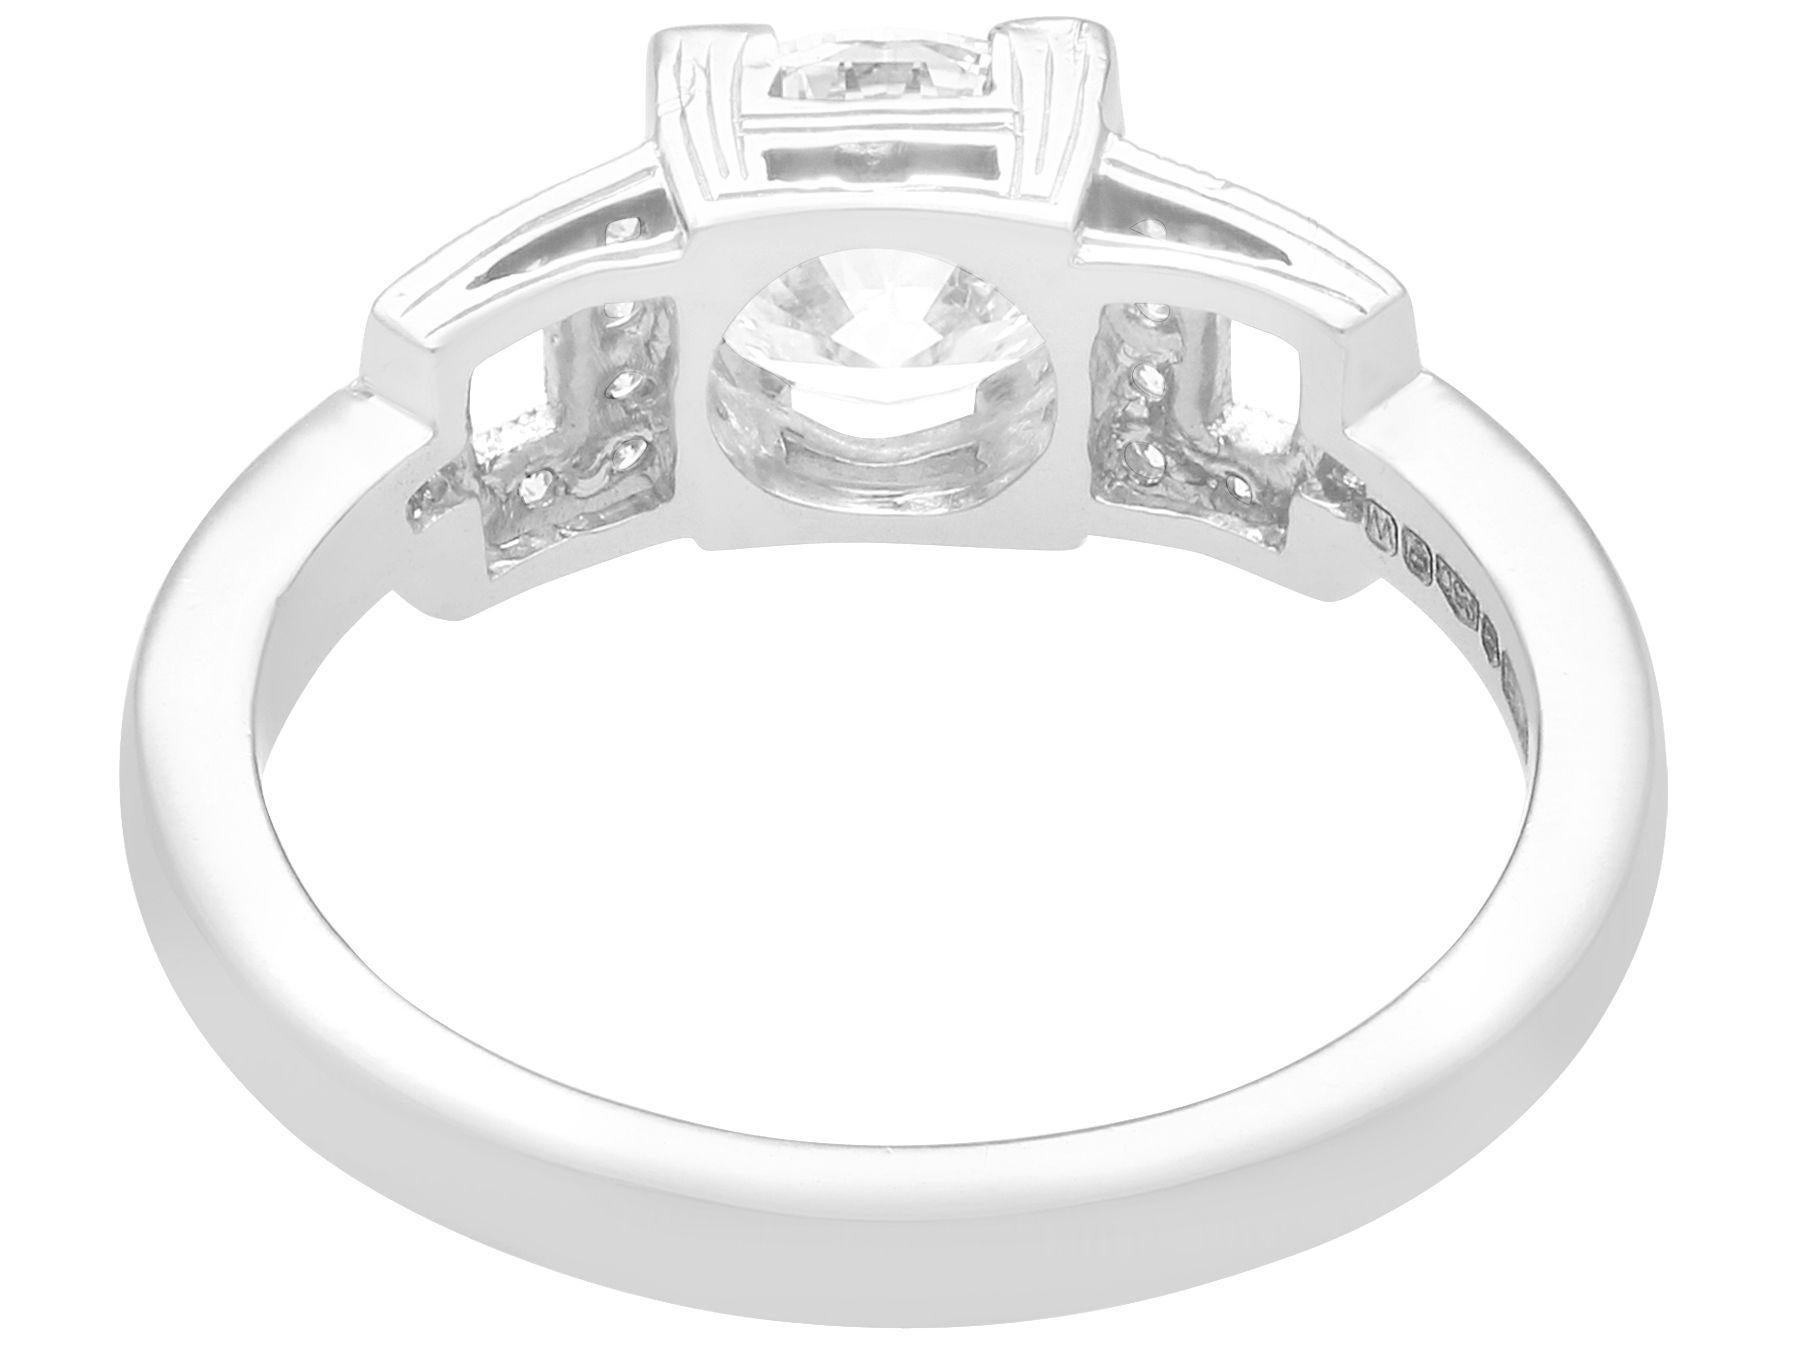 1.22 Carat Diamond and Platinum Solitaire Ring In Excellent Condition For Sale In Jesmond, Newcastle Upon Tyne